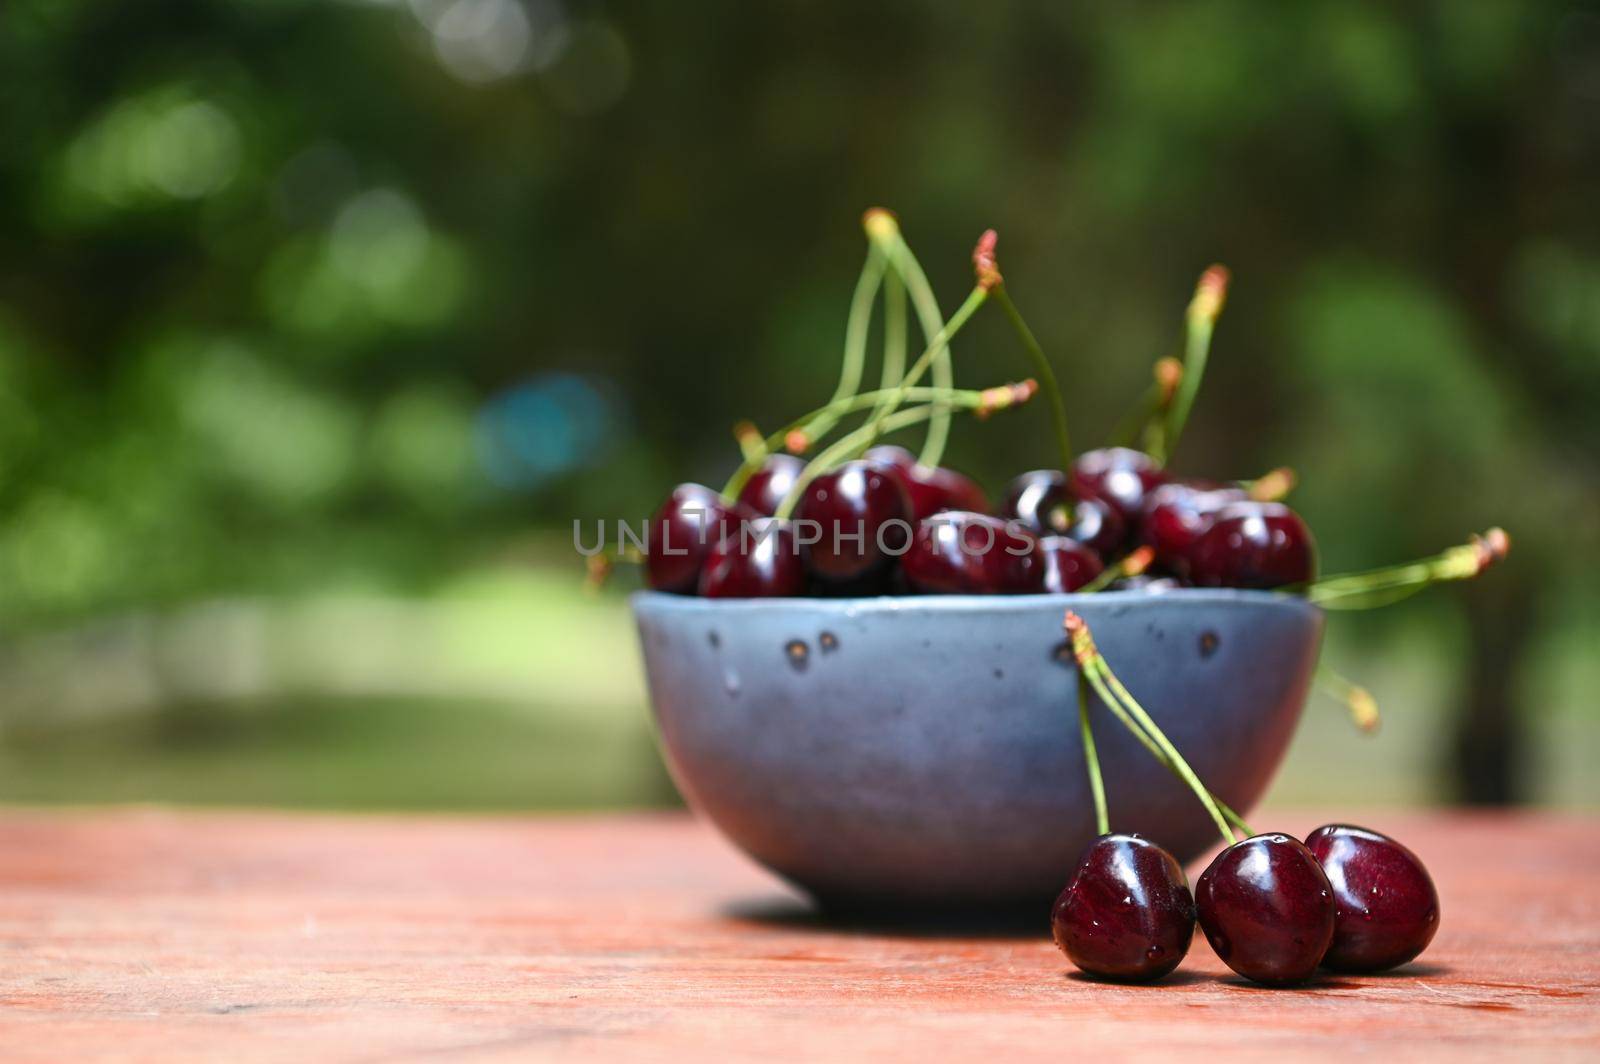 Still life composition of a pair of fresh ripe cherry berries on rustic wooden table, nearby a blue ceramic bowl full of ready-to-eat cherries against a blurred countryside nature background